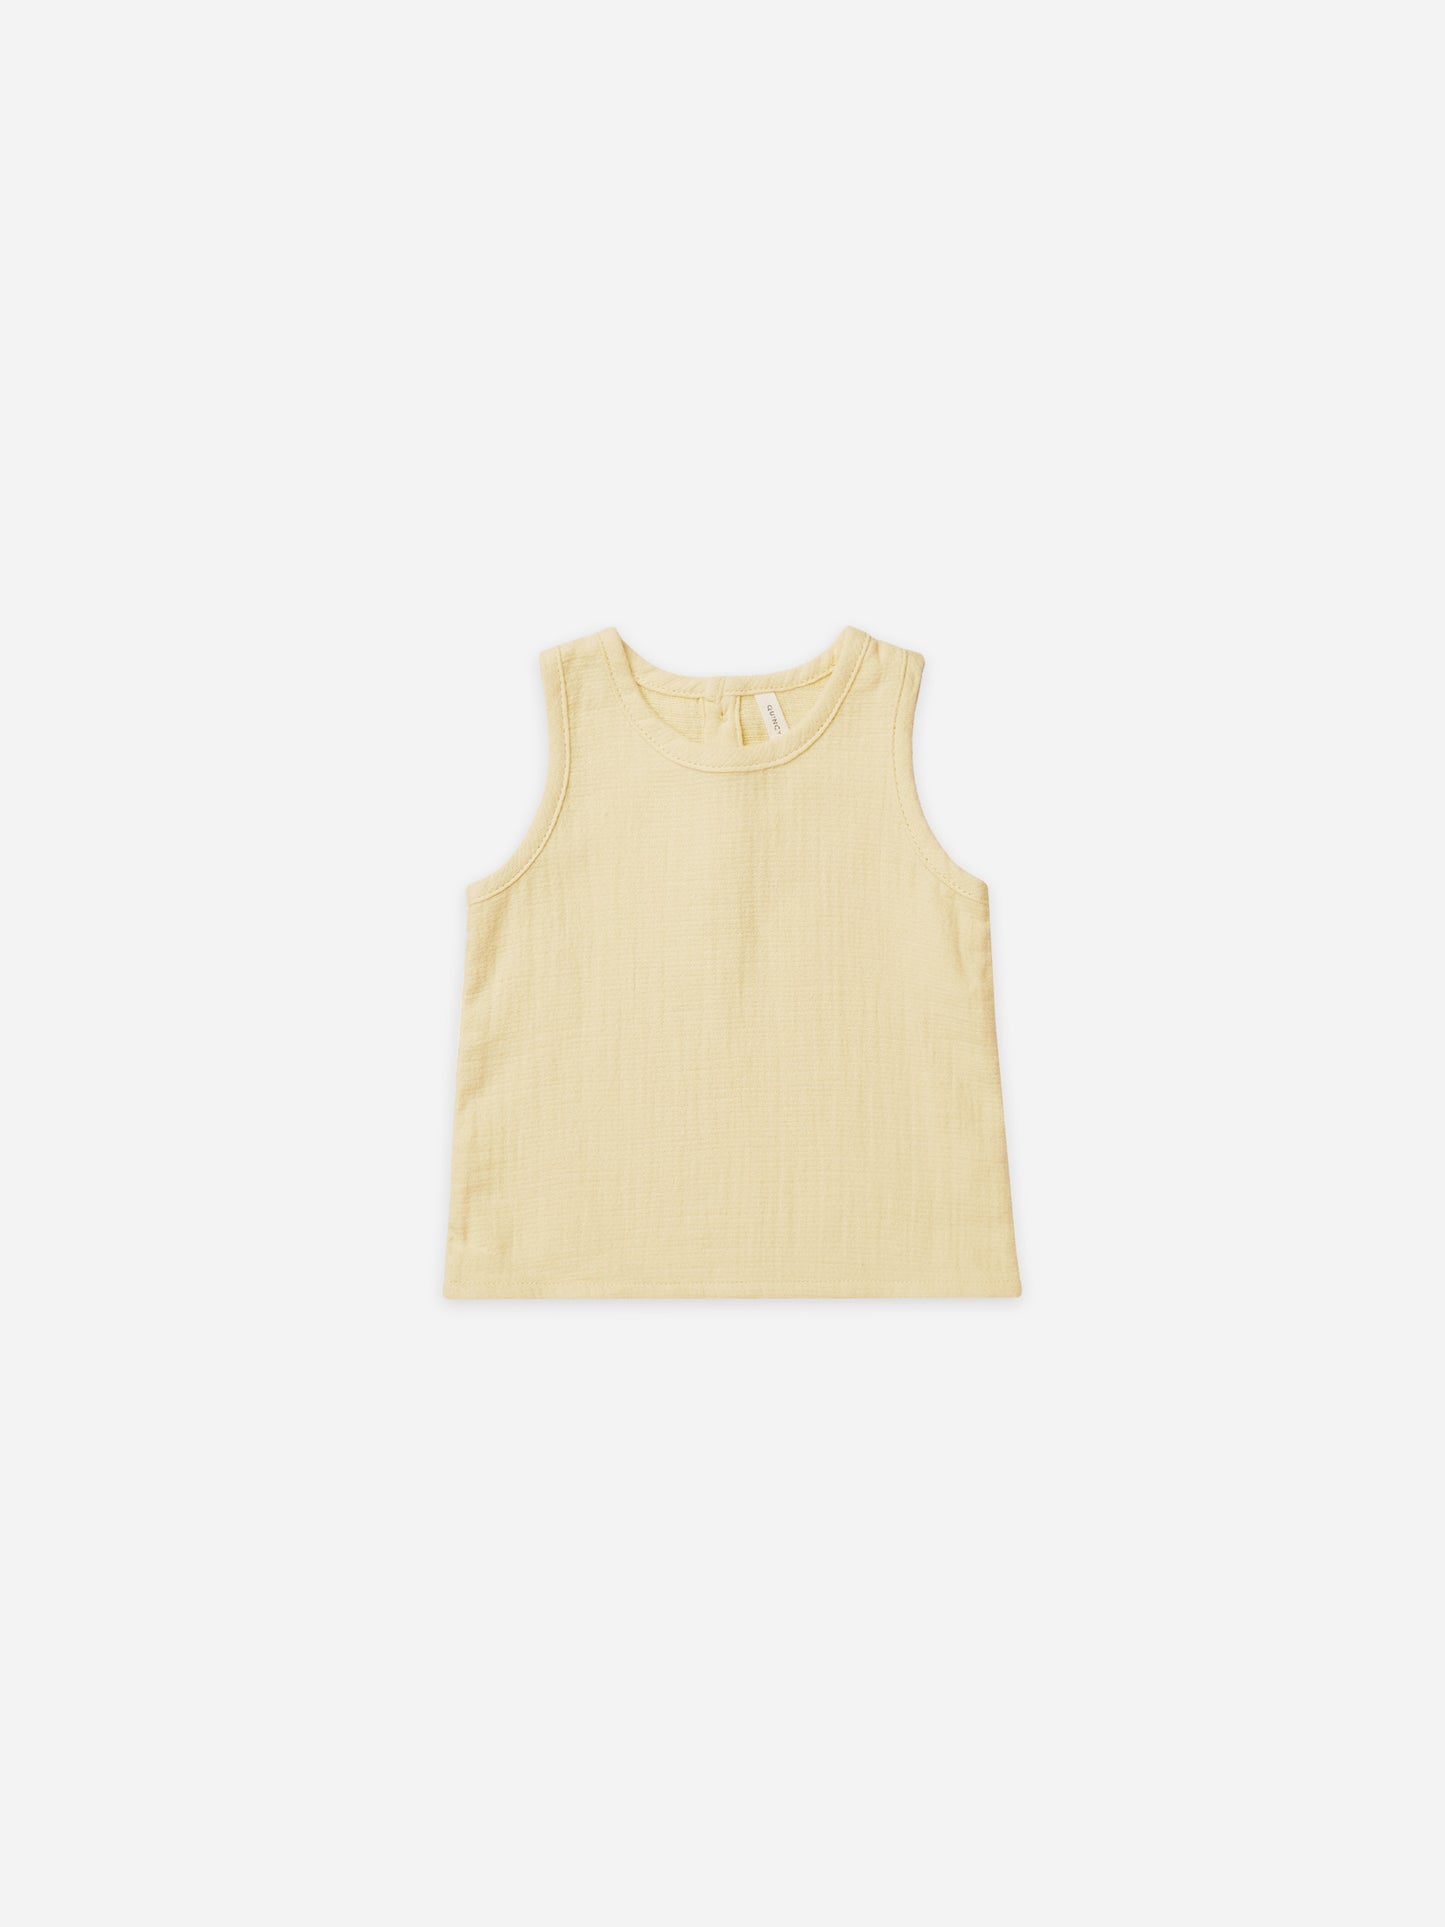 woven tank | yellow - Quincy Mae | Baby Basics | Baby Clothing | Organic Baby Clothes | Modern Baby Boy Clothes |